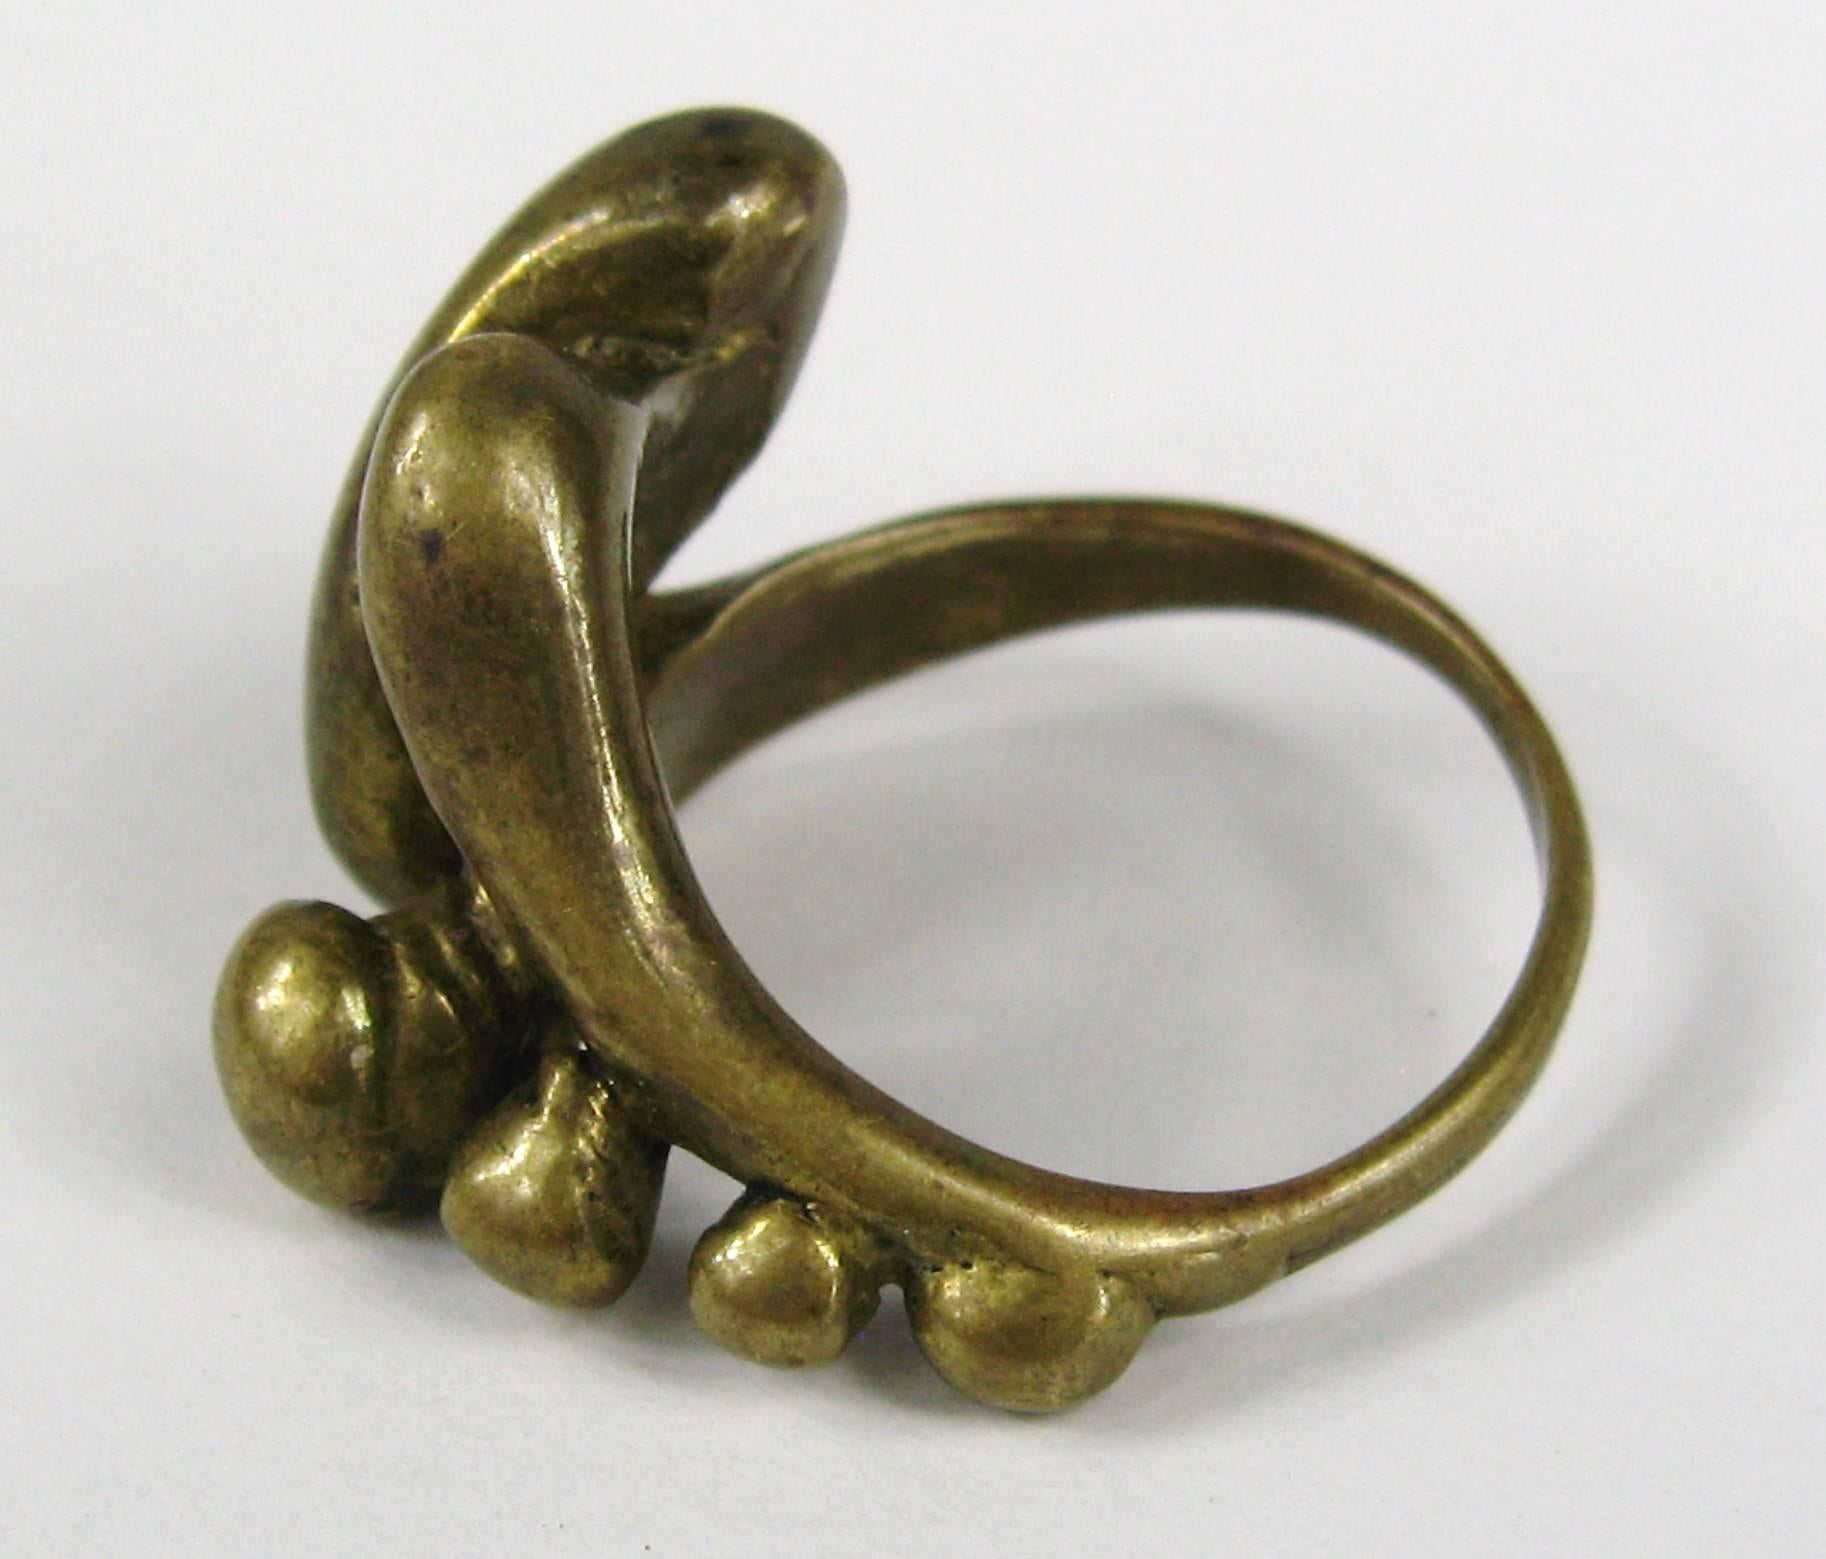 Pal Kepenyes Ring Modernist Bronze Brutalist  Mid Century  In Good Condition For Sale In Wallkill, NY